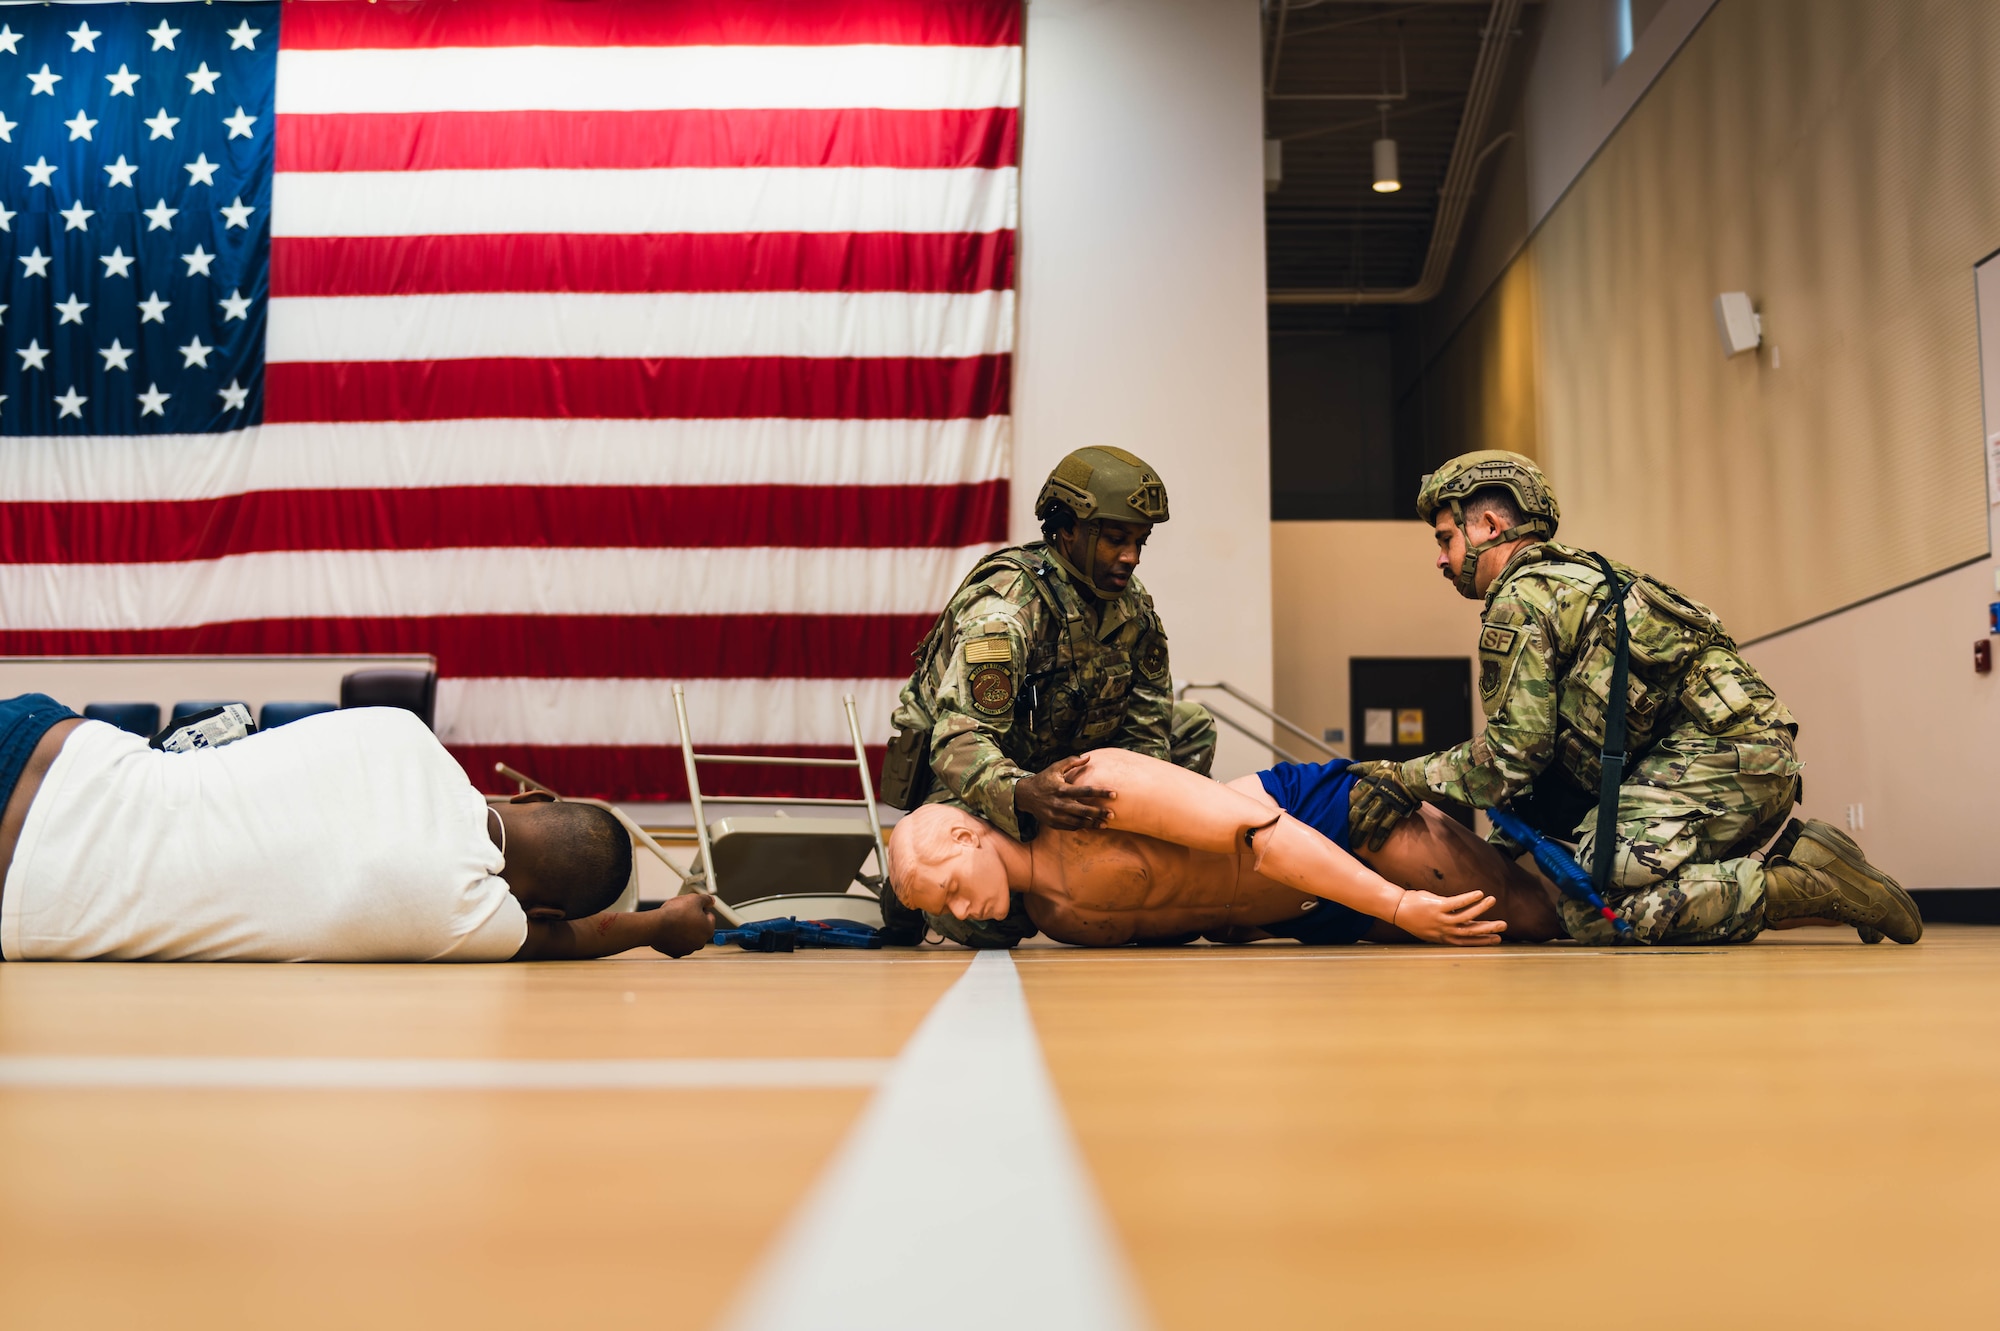 William Anderson (left), 56th Security Forces Squadron defender, and Tech Sgt. Jacob Sime (right), 56th SFS defender, perform a simulated emergency medical examination on a simulated injured victim during an active shooter exercise.